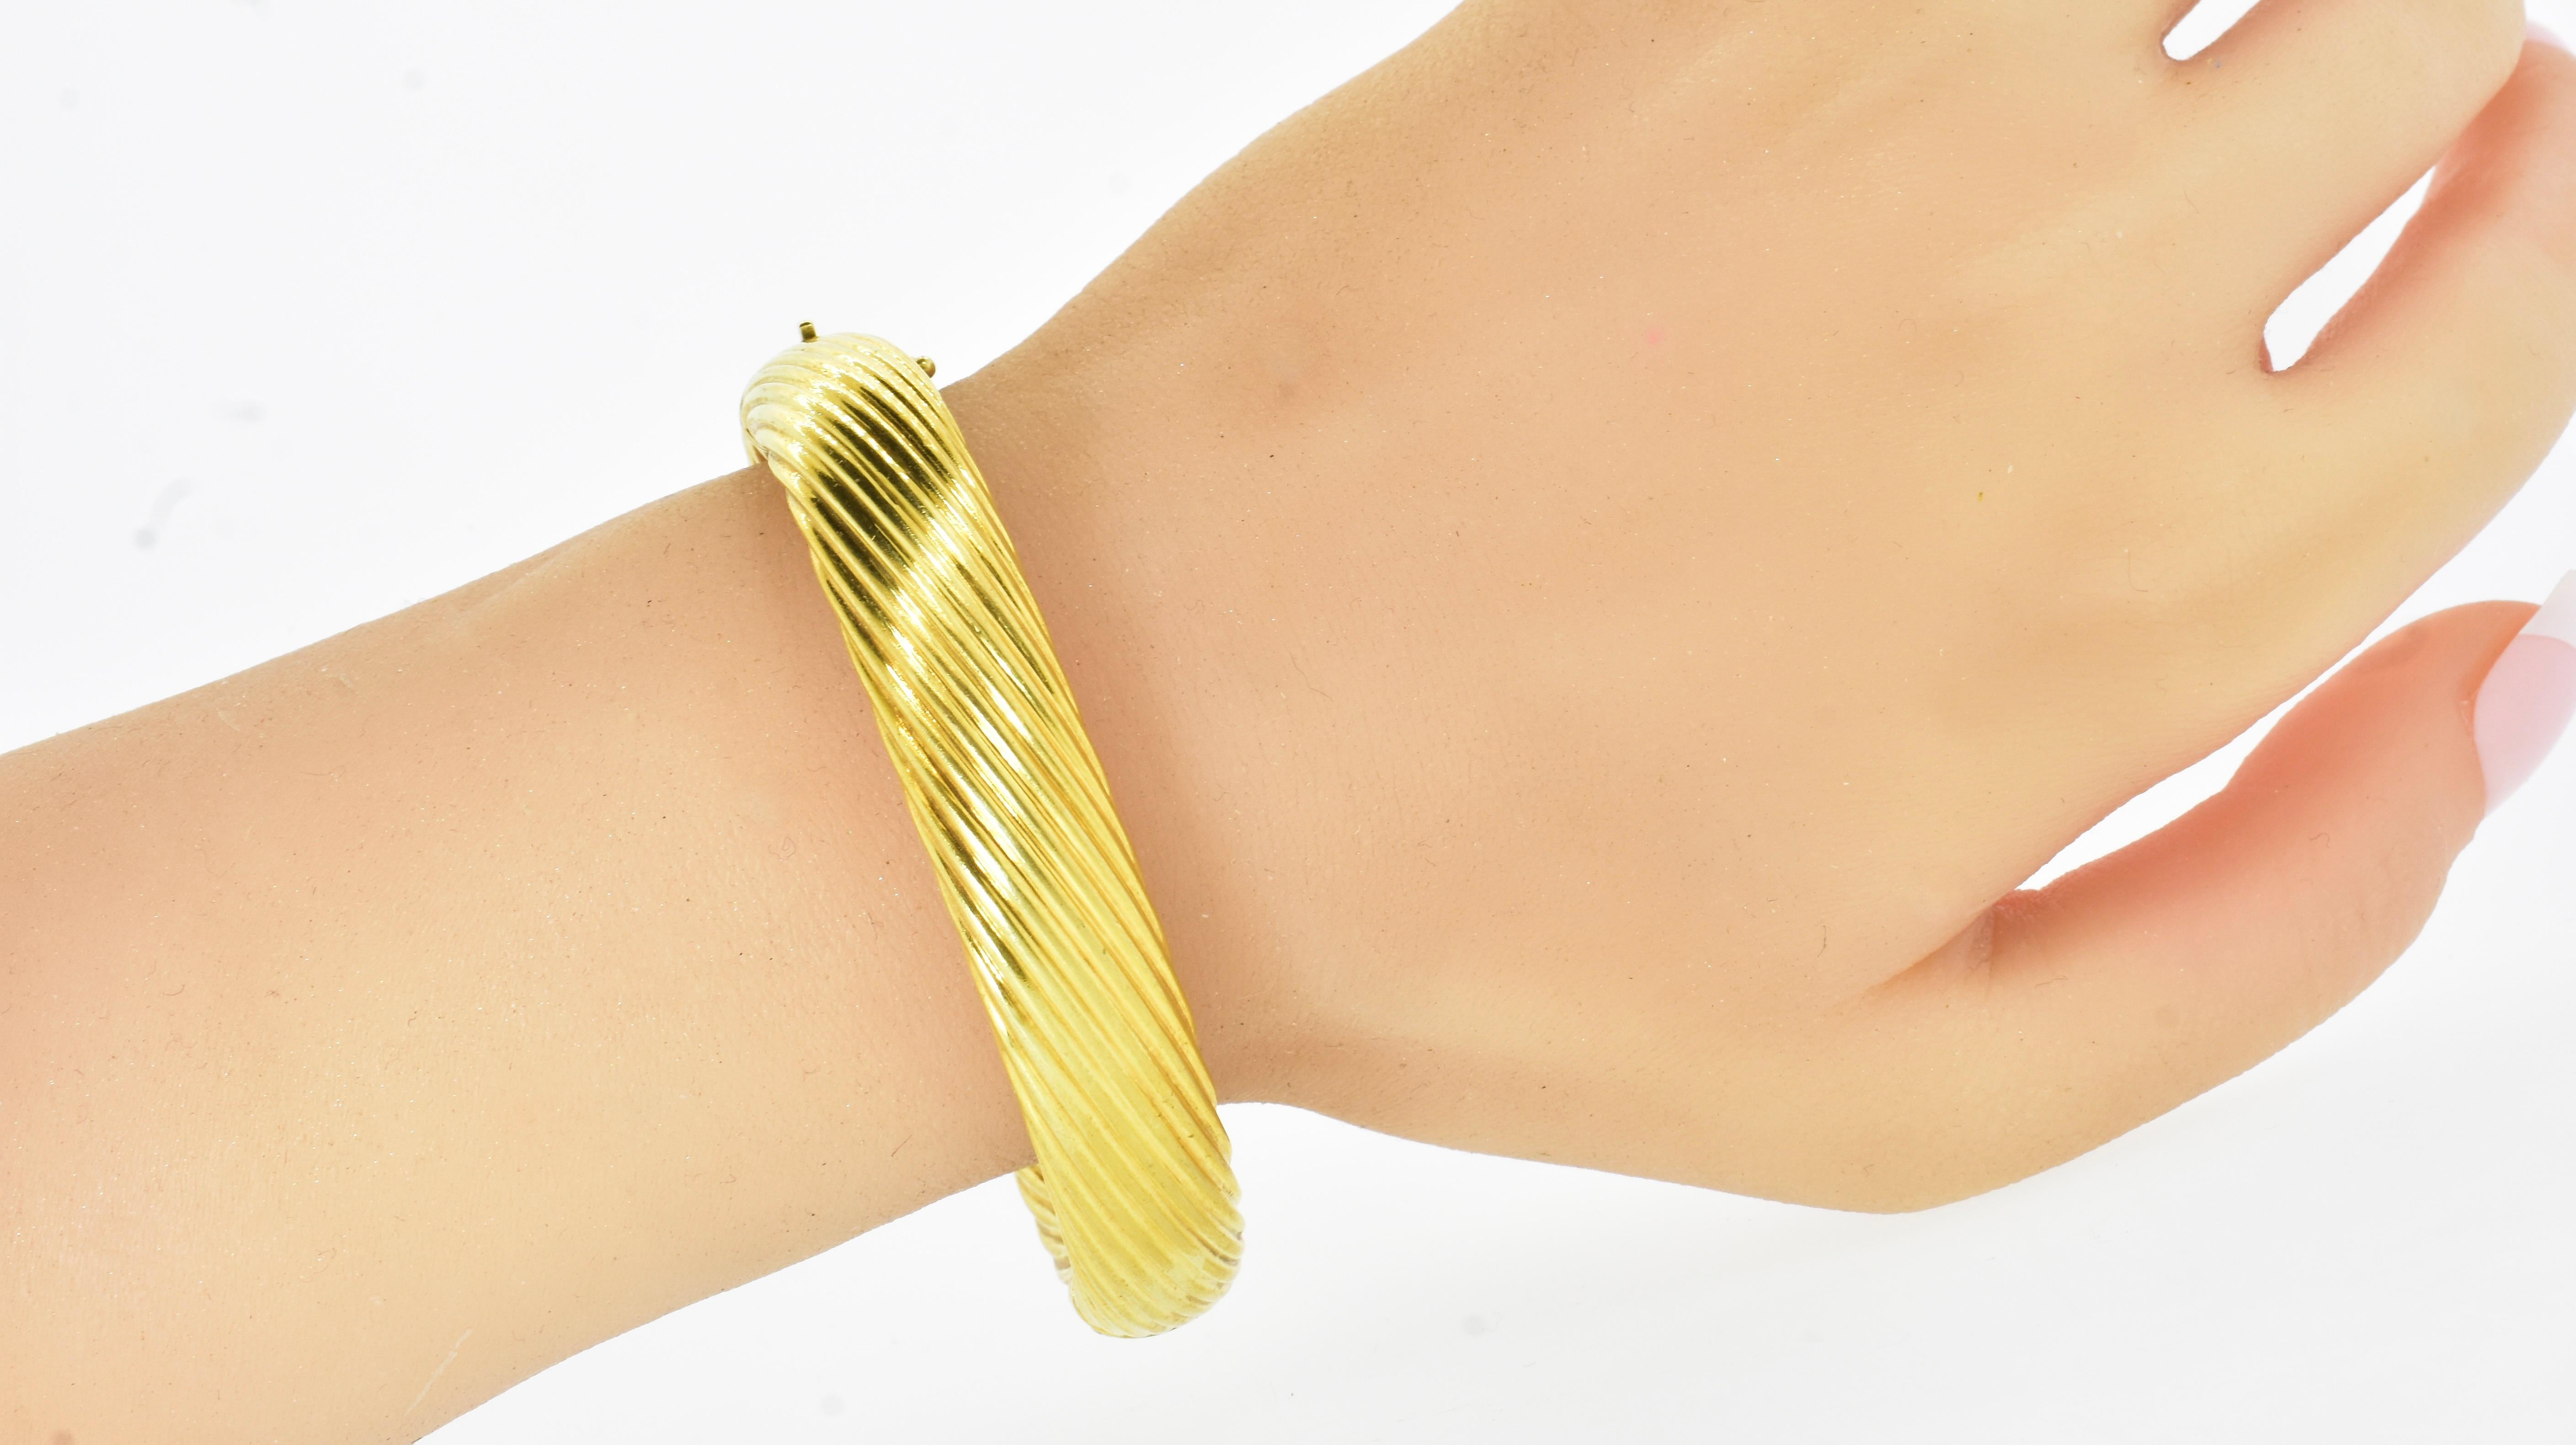 Contemporary 18K Yellow Gold Twist Vintage Bangle or Cuff Bracelet that Opens, c. 1960